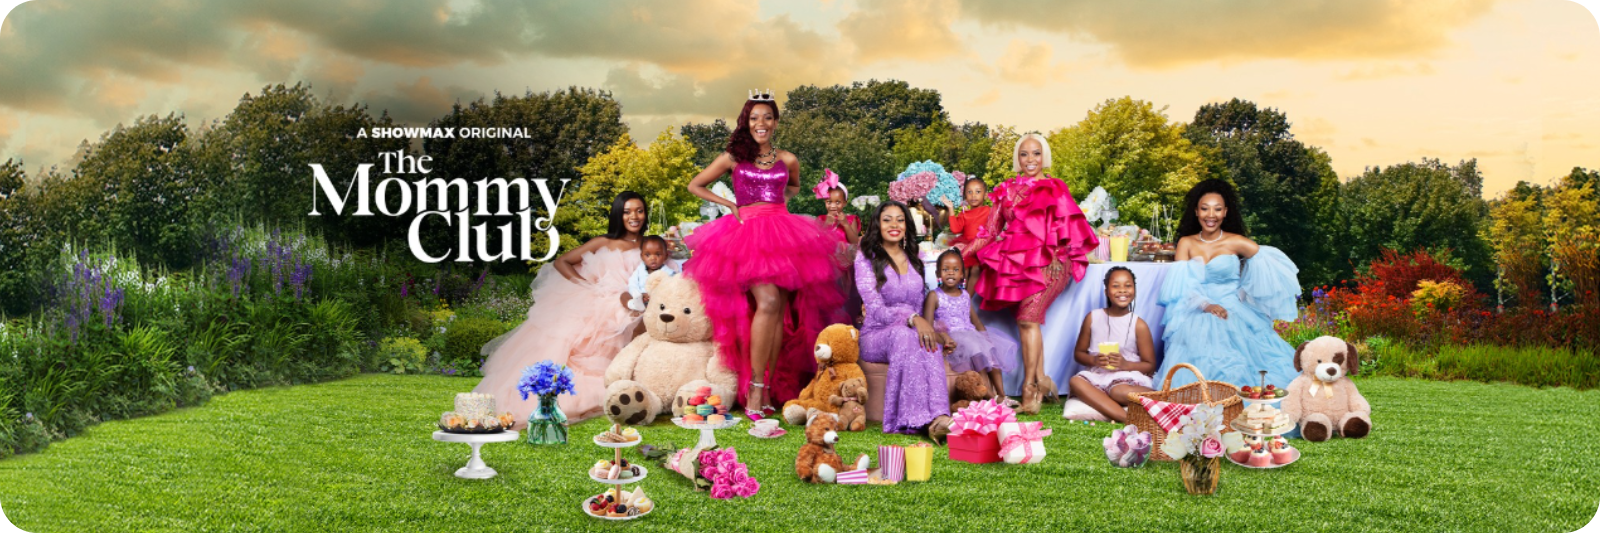 the mommy club showmax cast season 2,the mommy club season 2 release date in south africa,the mommy club reunion season 2